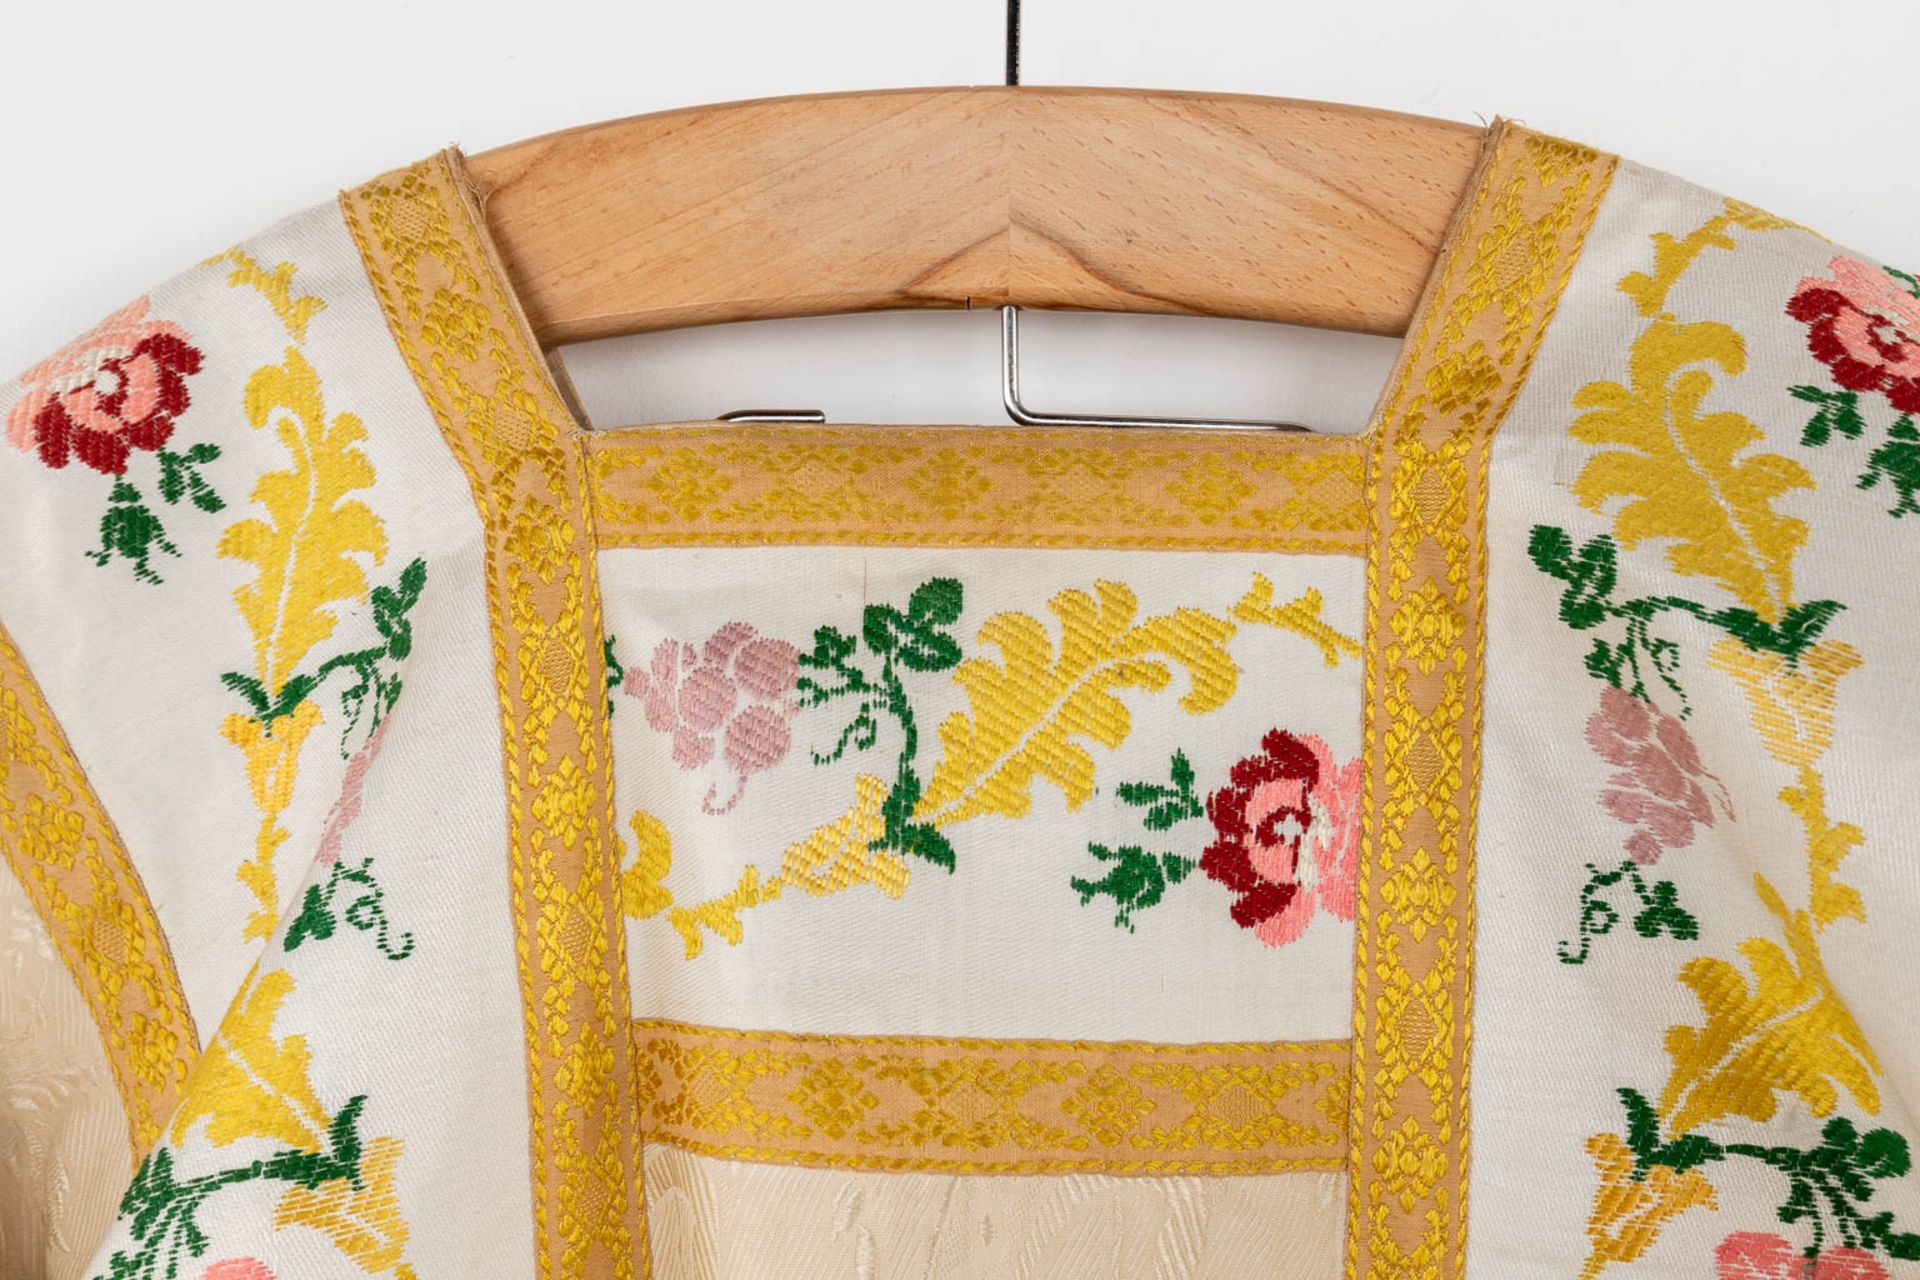 Four Dalmatics, Two Roman Chasubles, A stola and Chalice Veil, finished with embroideries. - Image 39 of 59